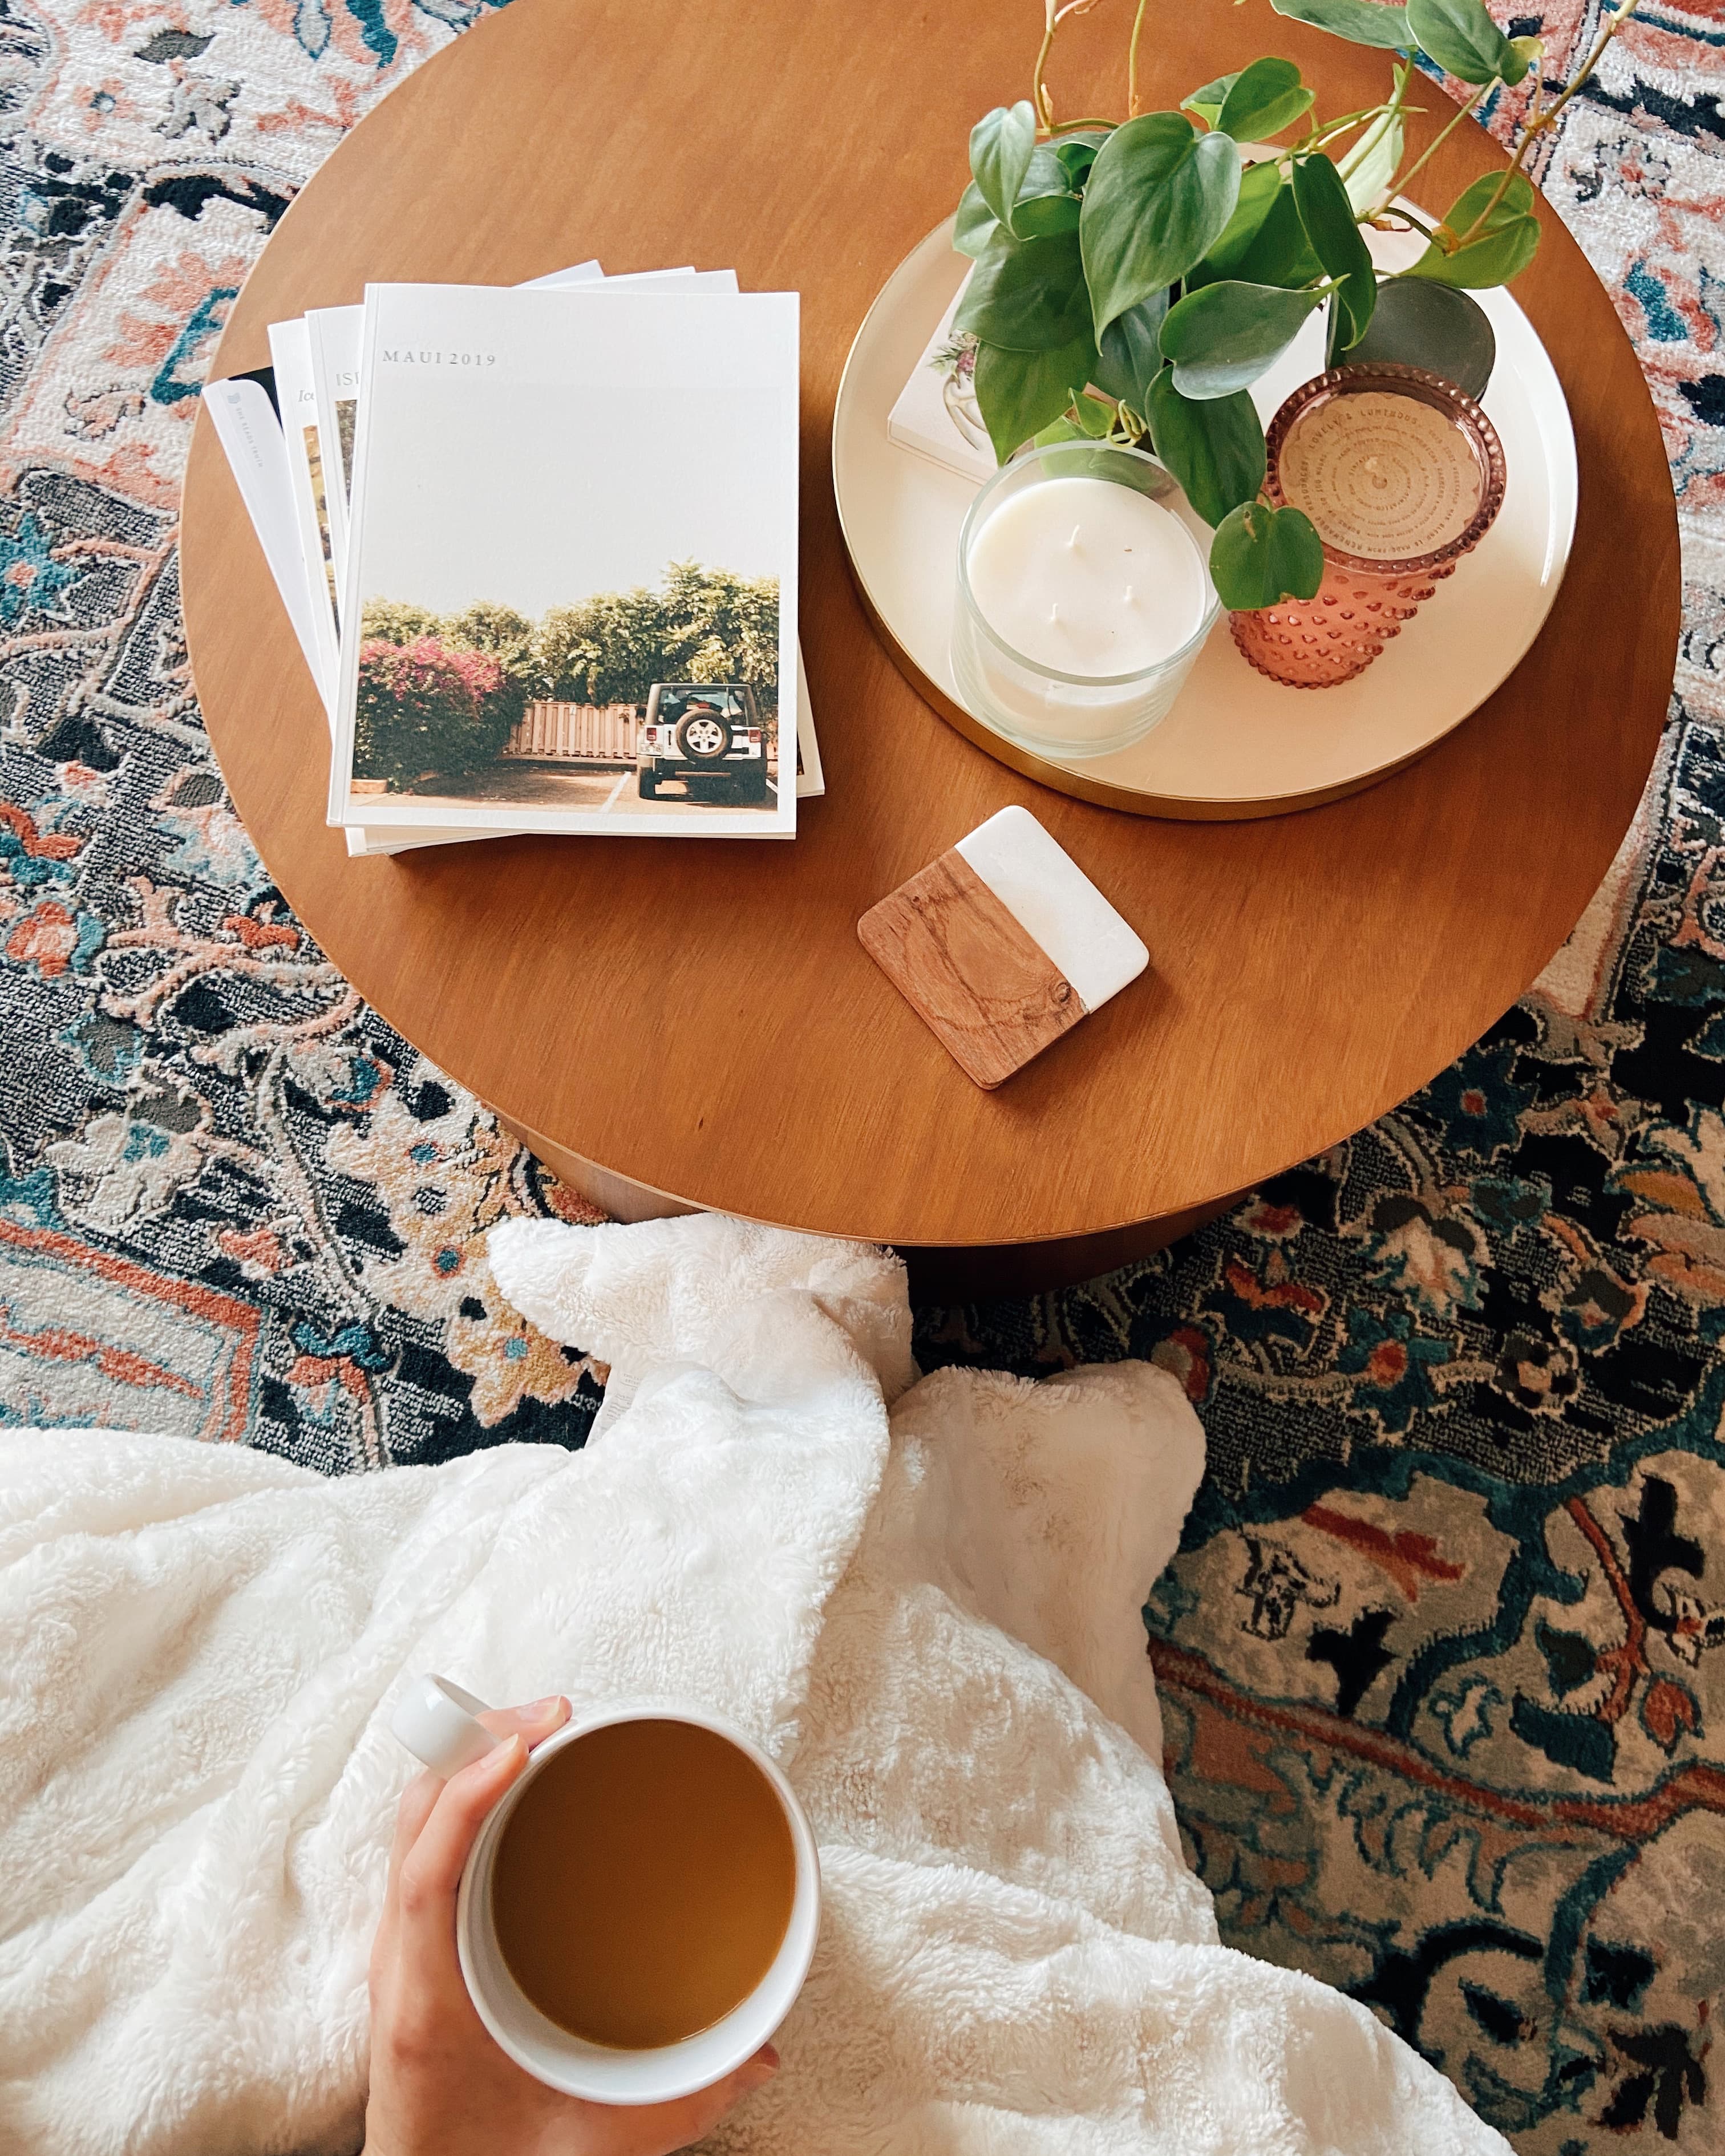 Styled photo of books on a table alongside a plant with a vibrant rug in the background. Female holding cup of coffee alongside fluffy blanket.